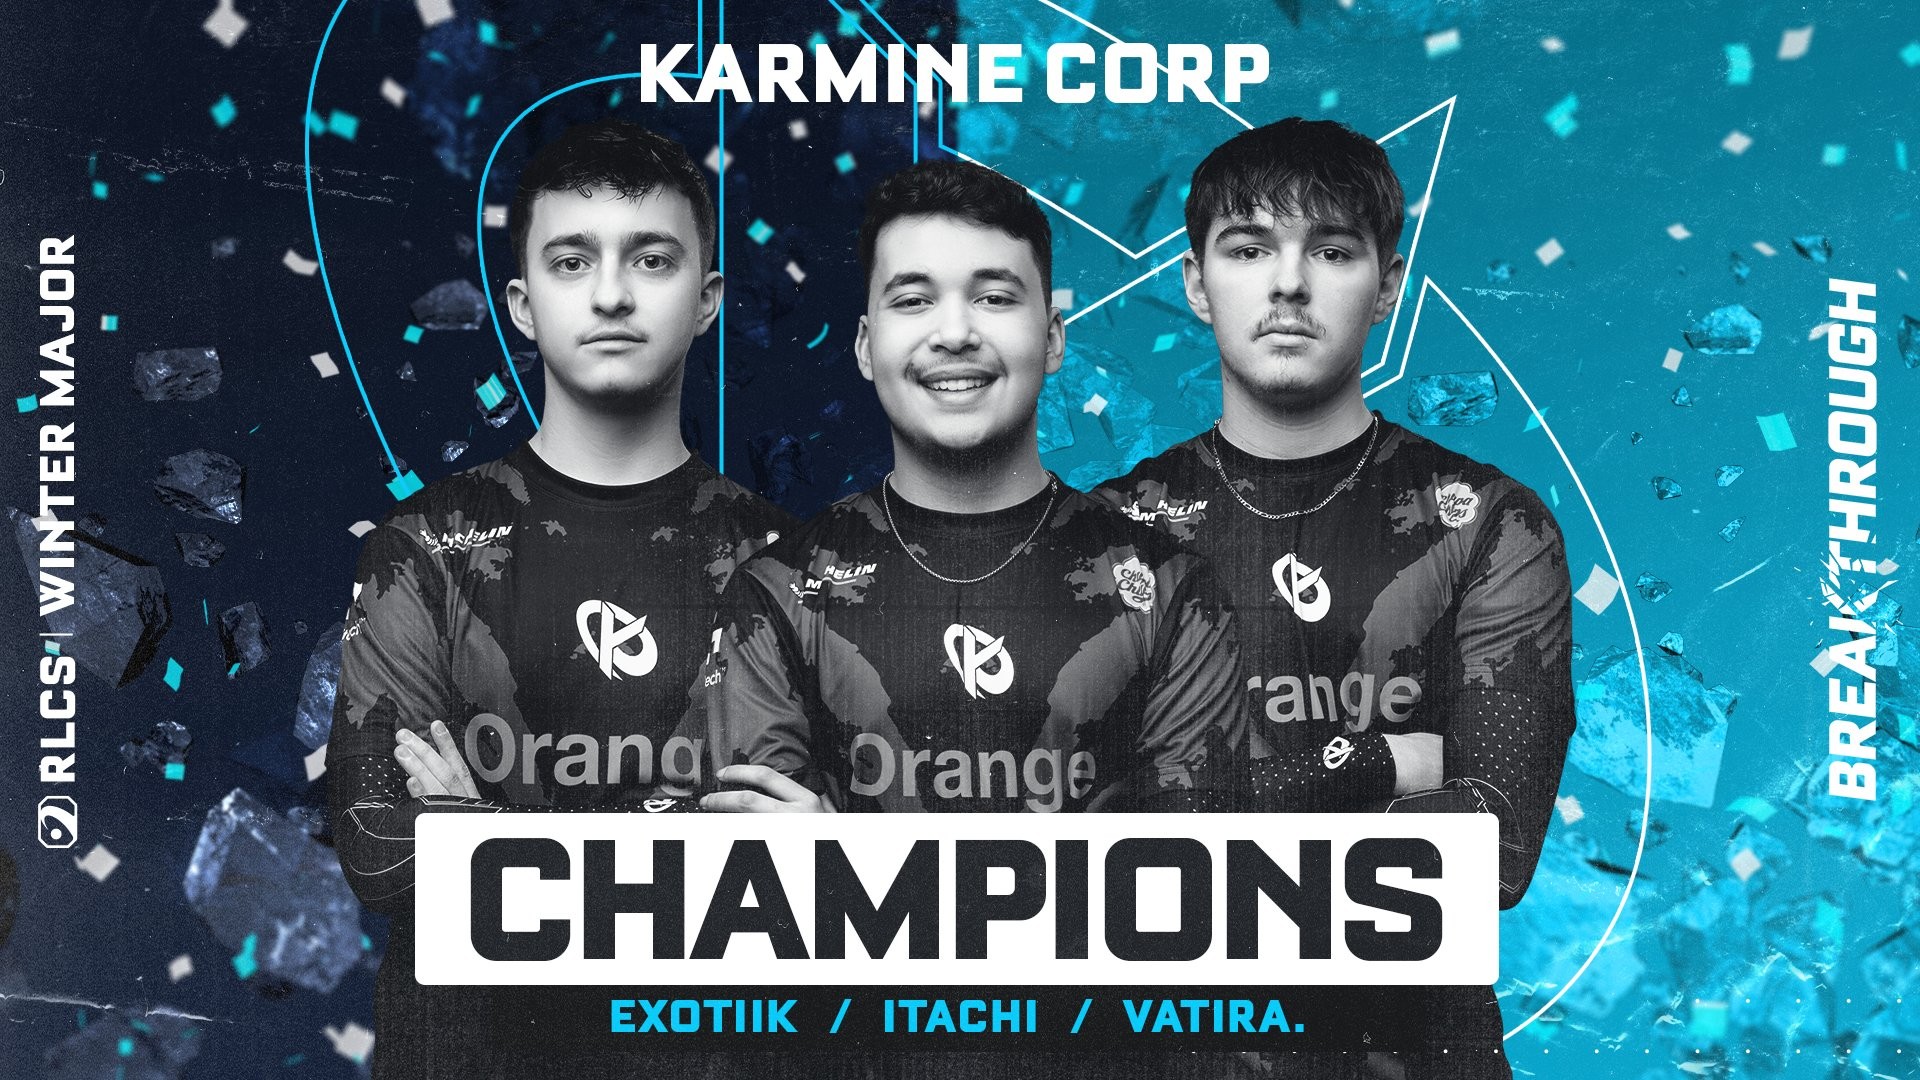 Karmine Corp secures a place in the Rocket League World Championship